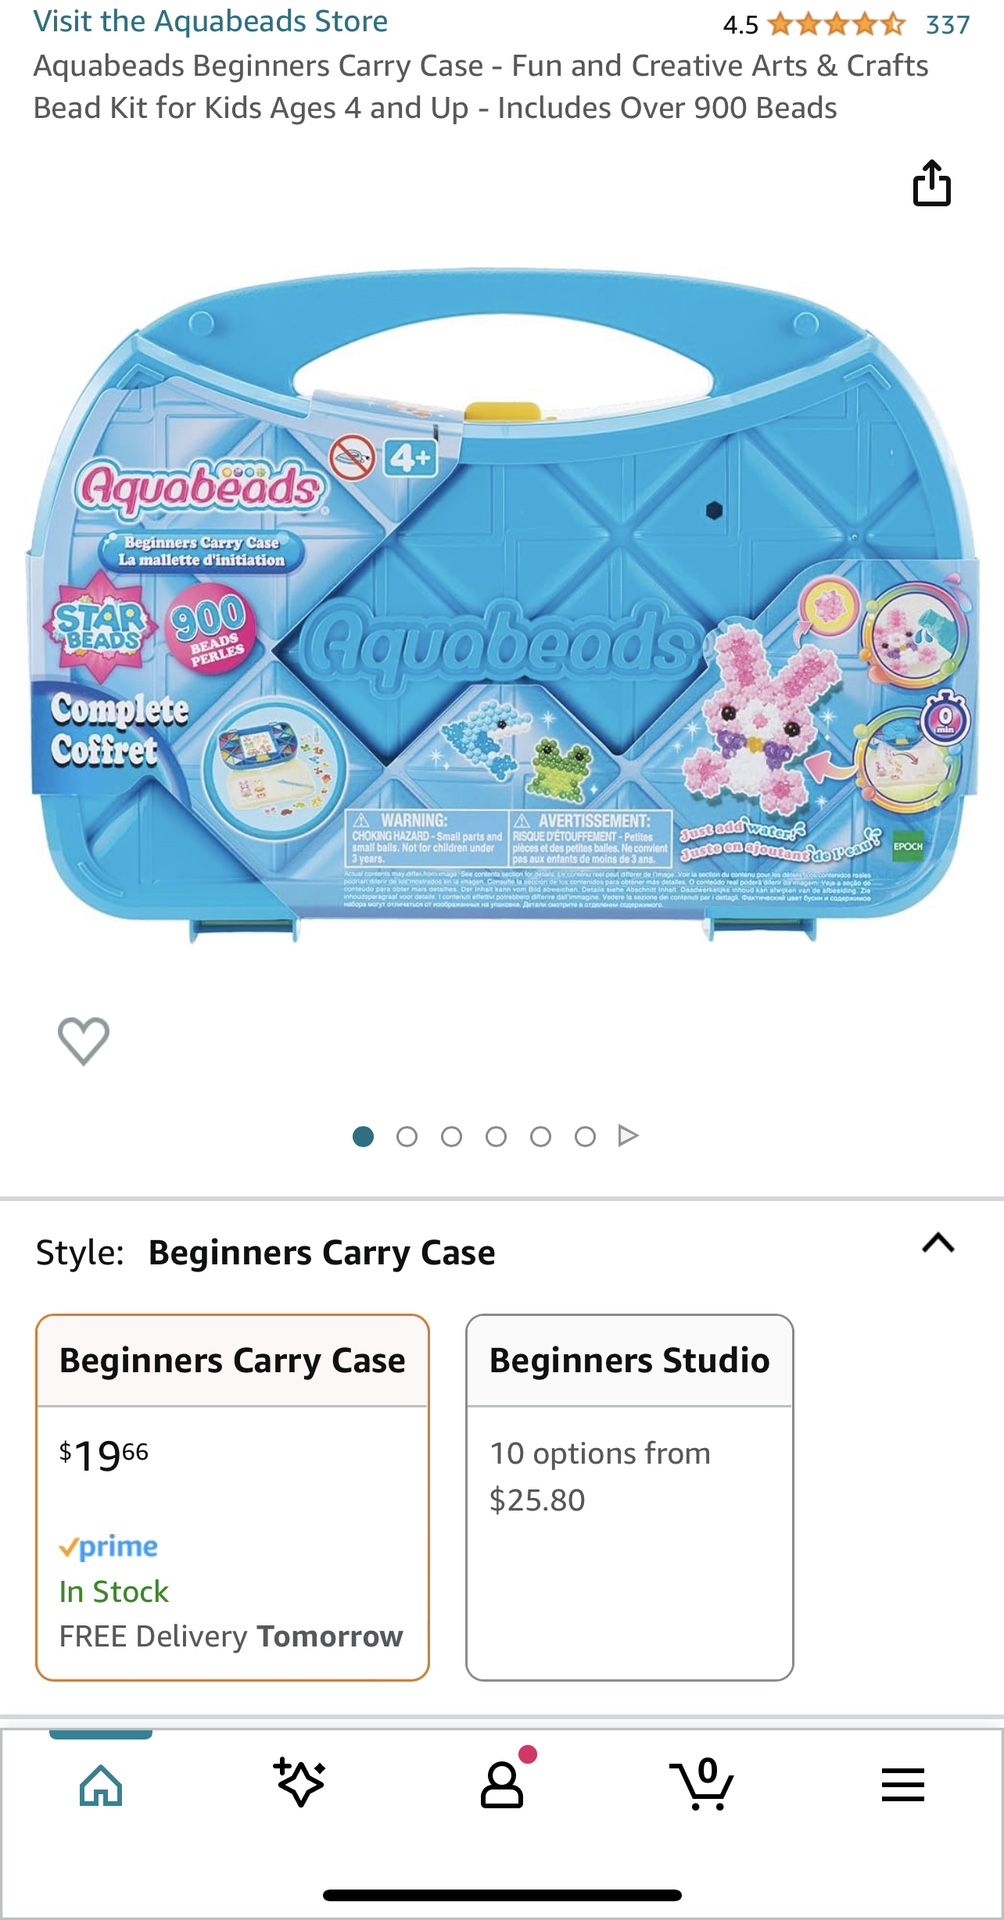 Aquabeads Beginners Carry Case - Fun and Creative Arts & Crafts Bead Kit for Kids Ages 4 